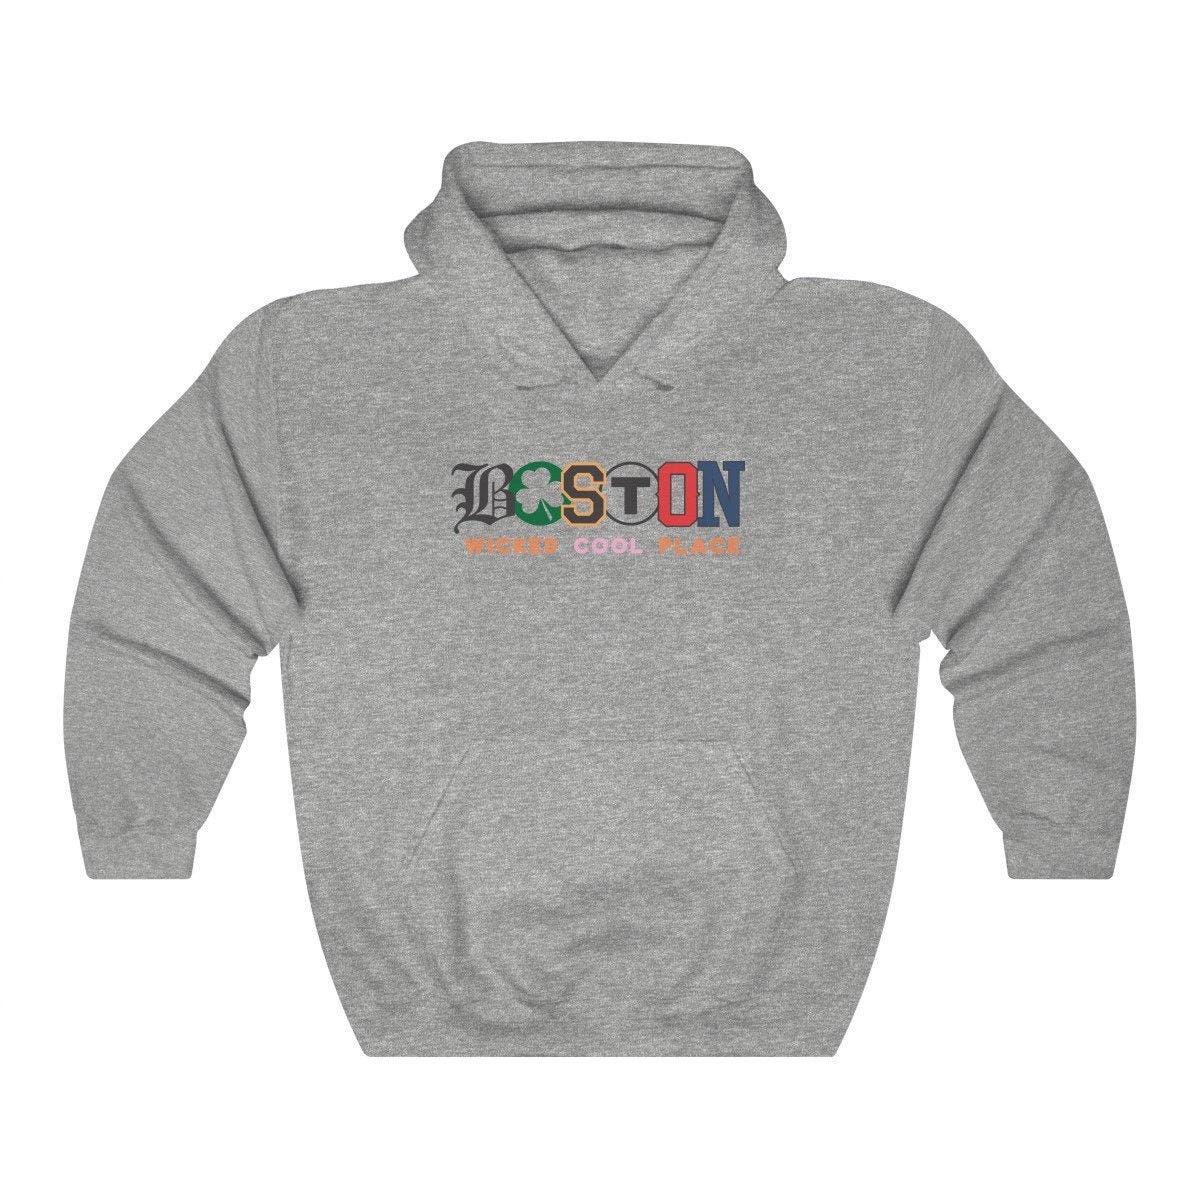 Boston wicked cool place Unisex Heavy Blend Hooded | Etsy